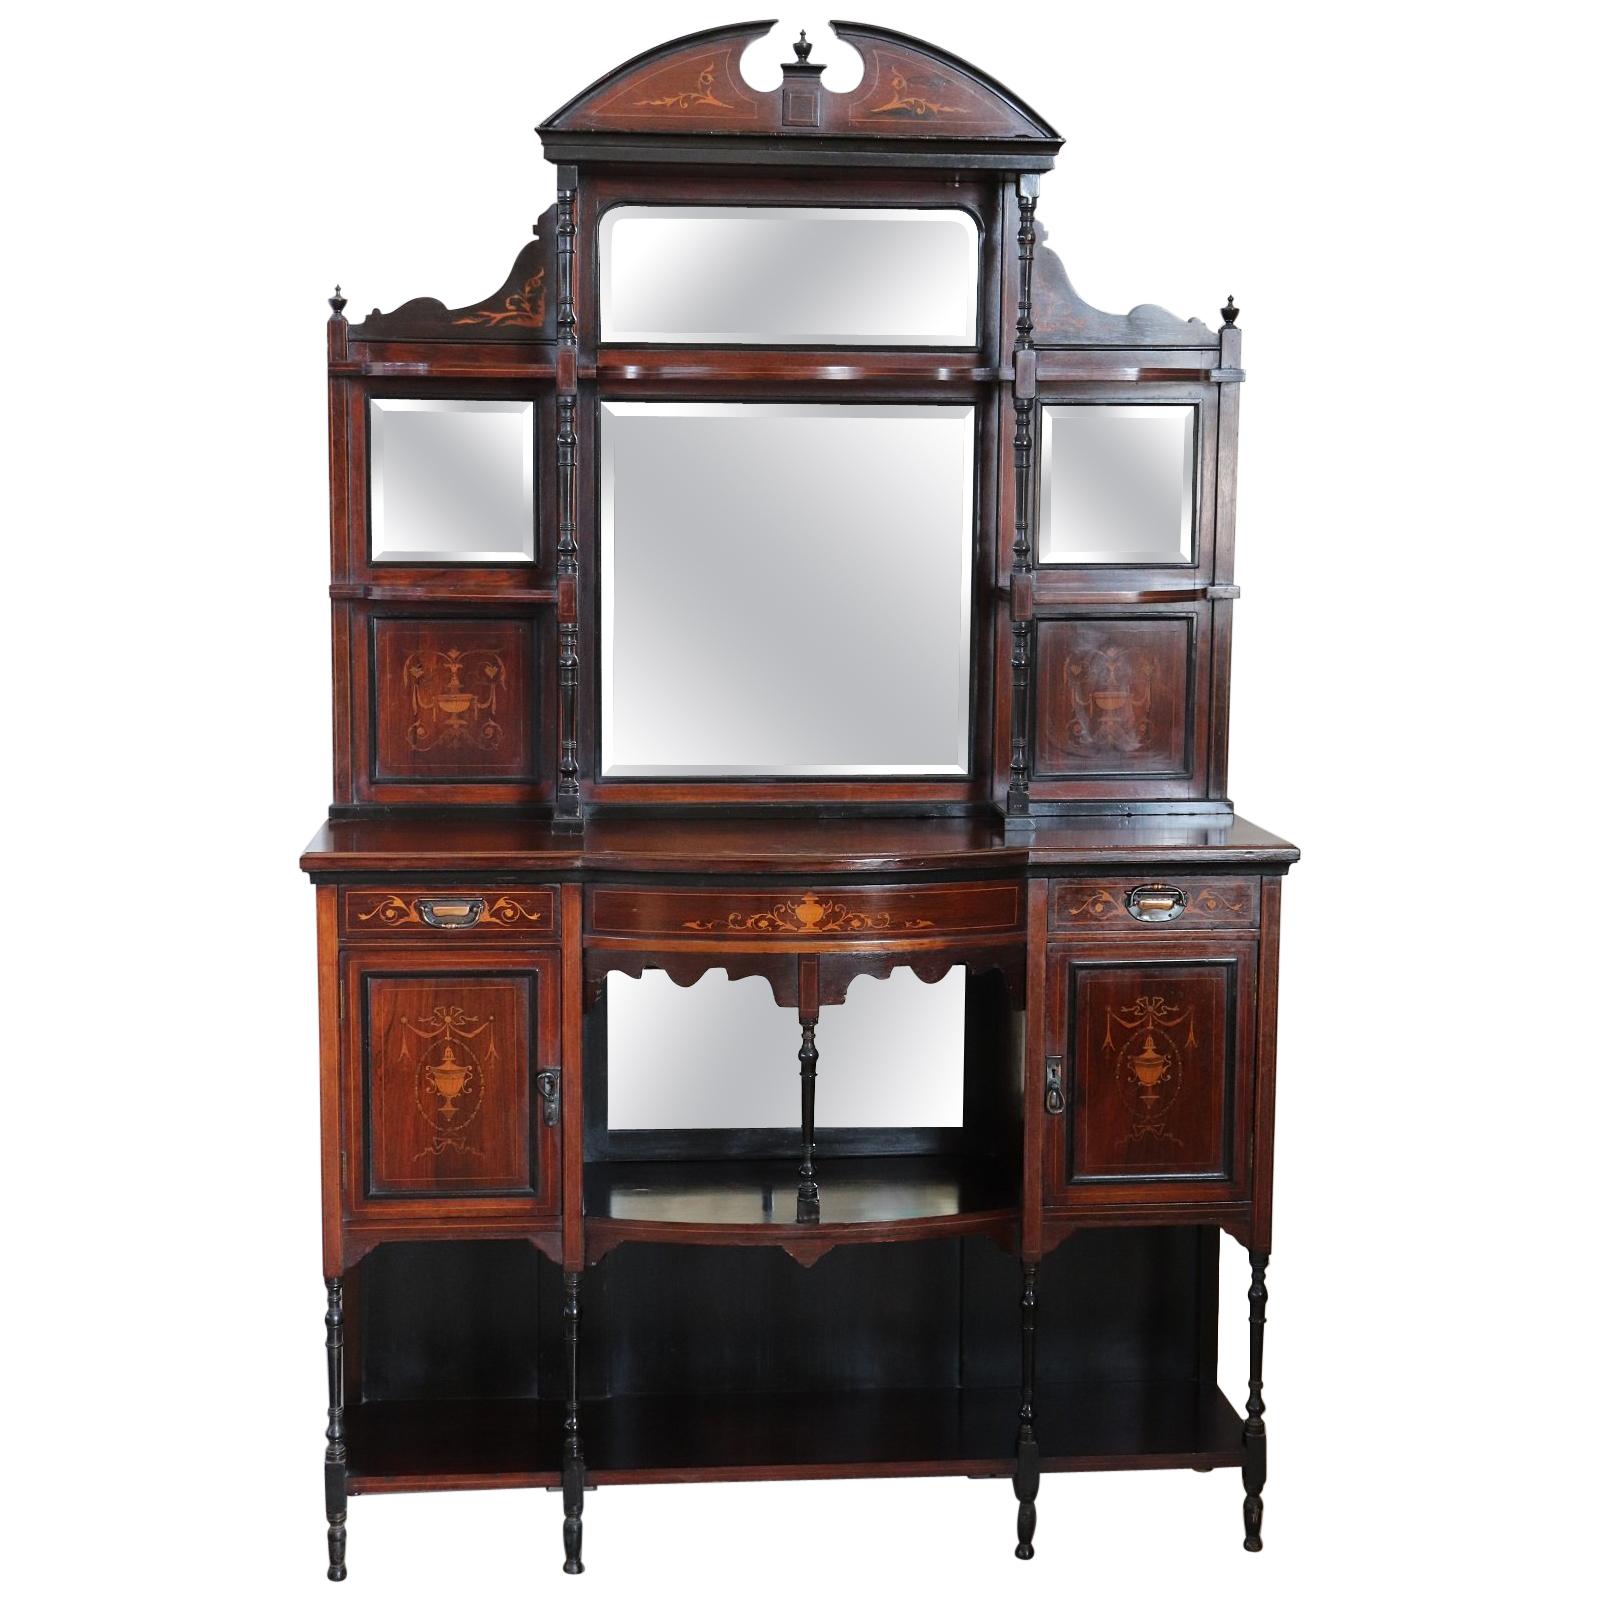 20th Century English Inlaid Rosewood Cabinet with Mirror